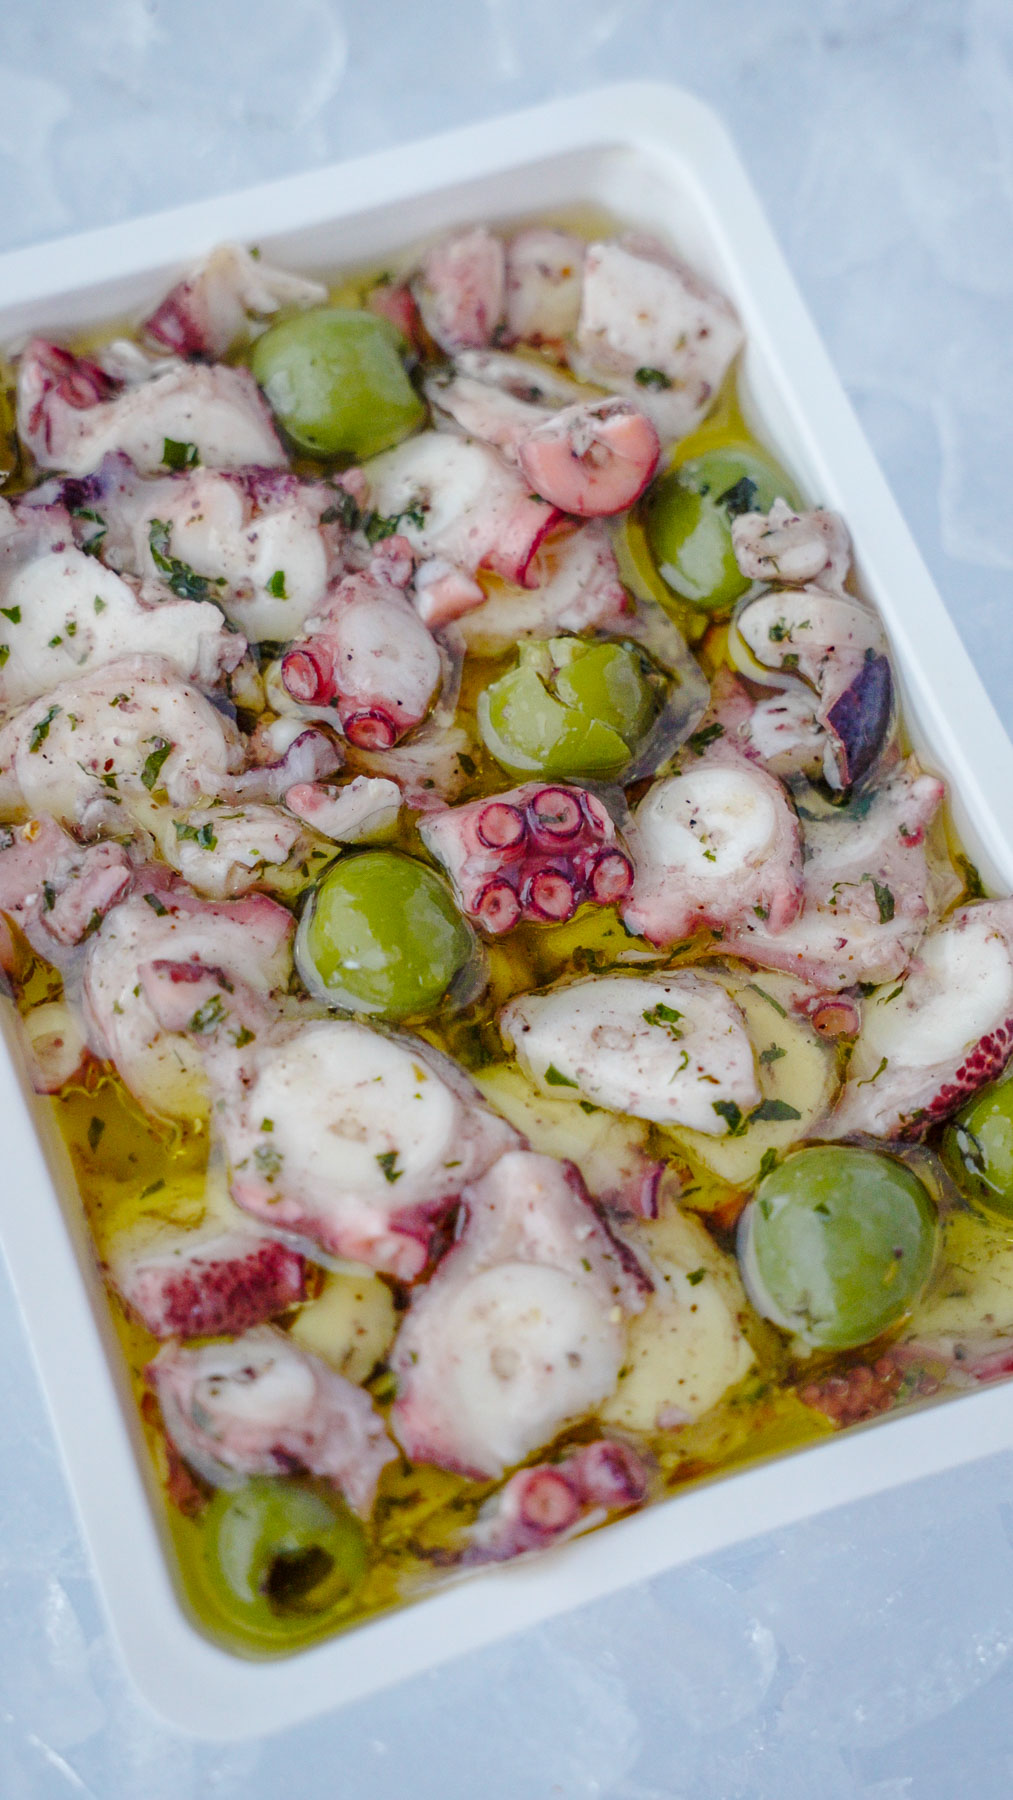 Marinated Octopus Salad with Olive, Mint and Lemon